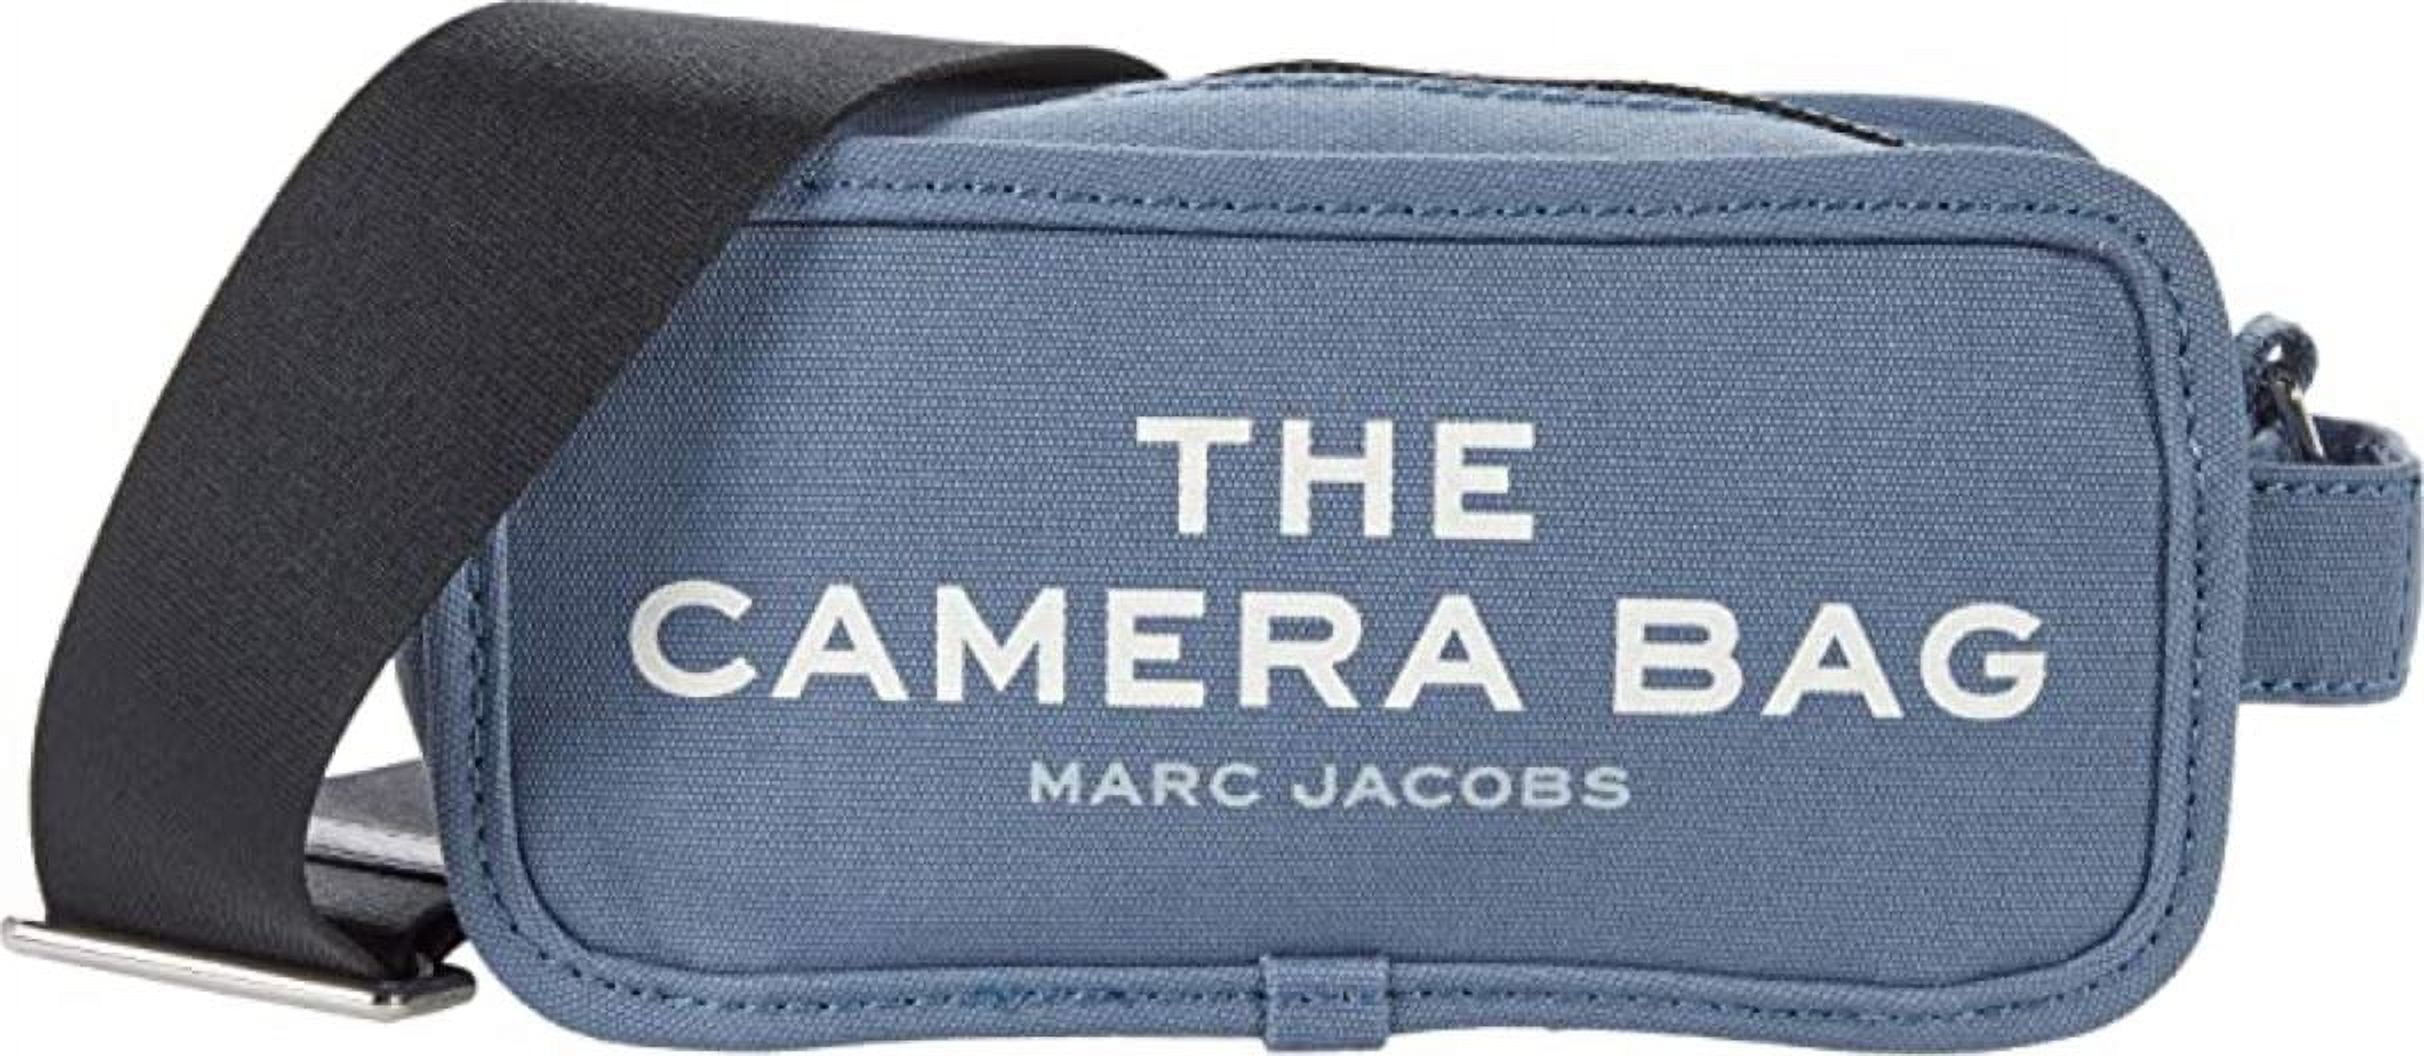 Marc Jacobs M0017040-372 Women's The Camera Bag, Slate Green, One Size 